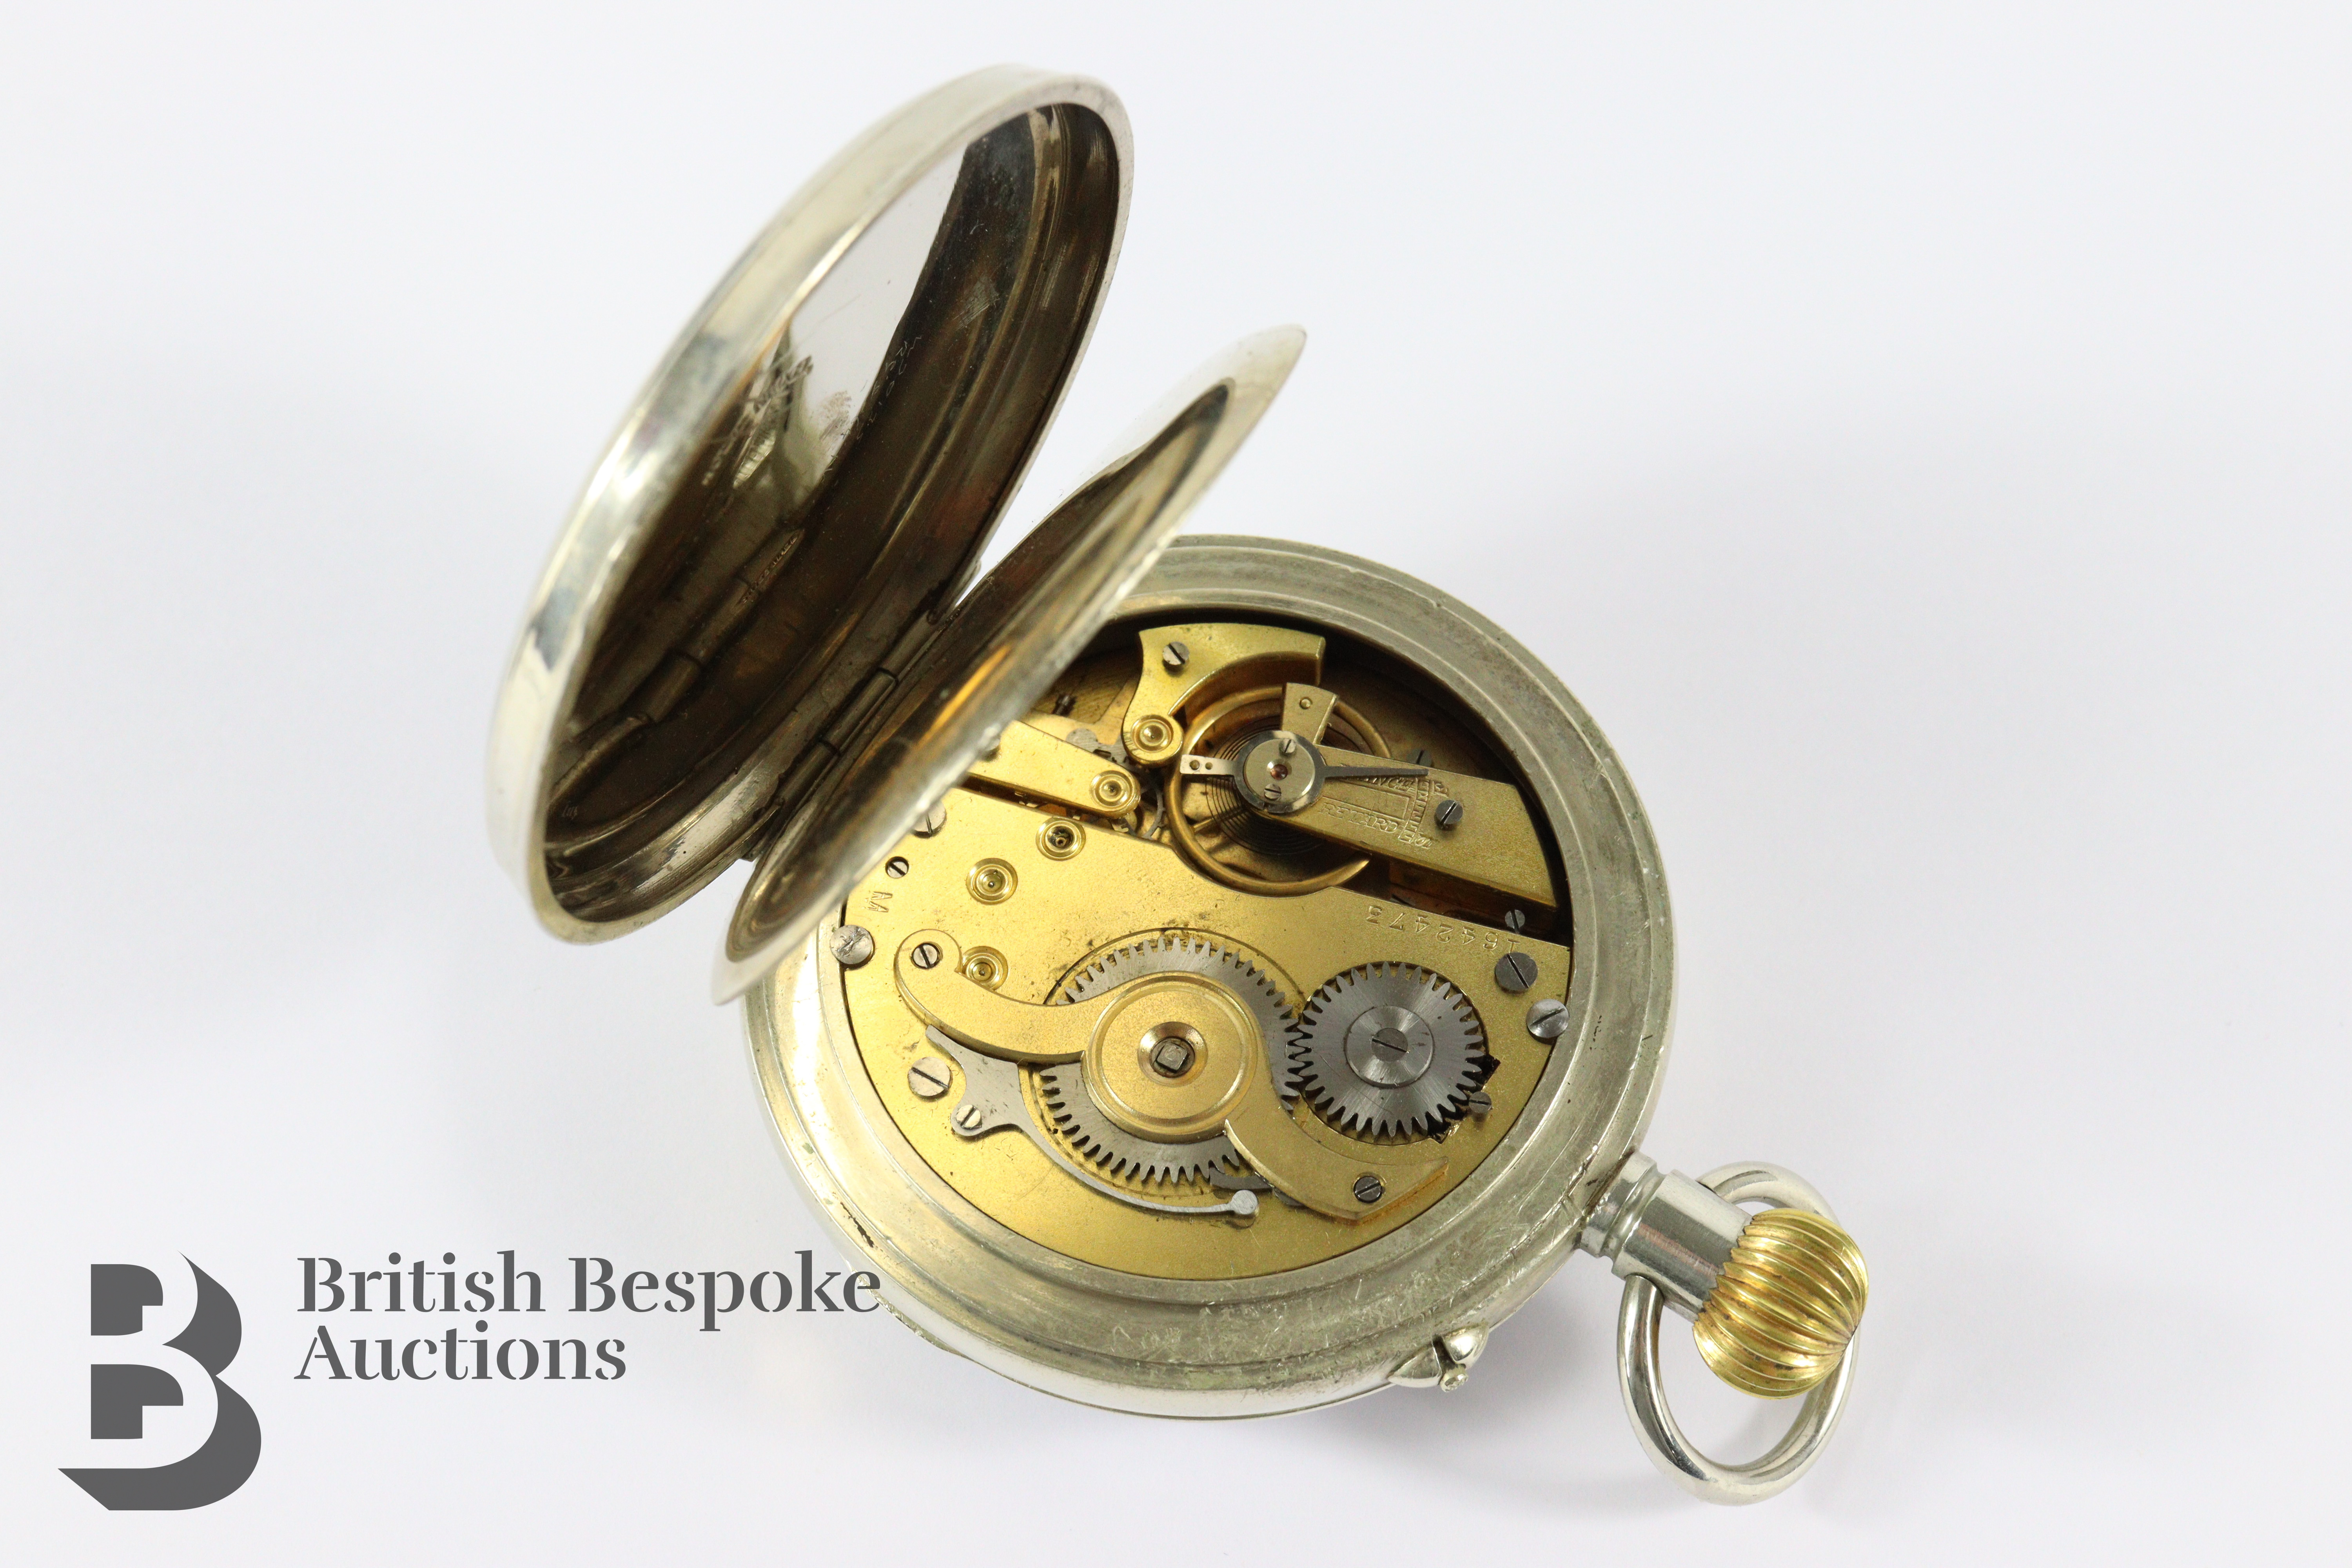 Stainless Steel Goliath Pocket Watch - Image 4 of 4